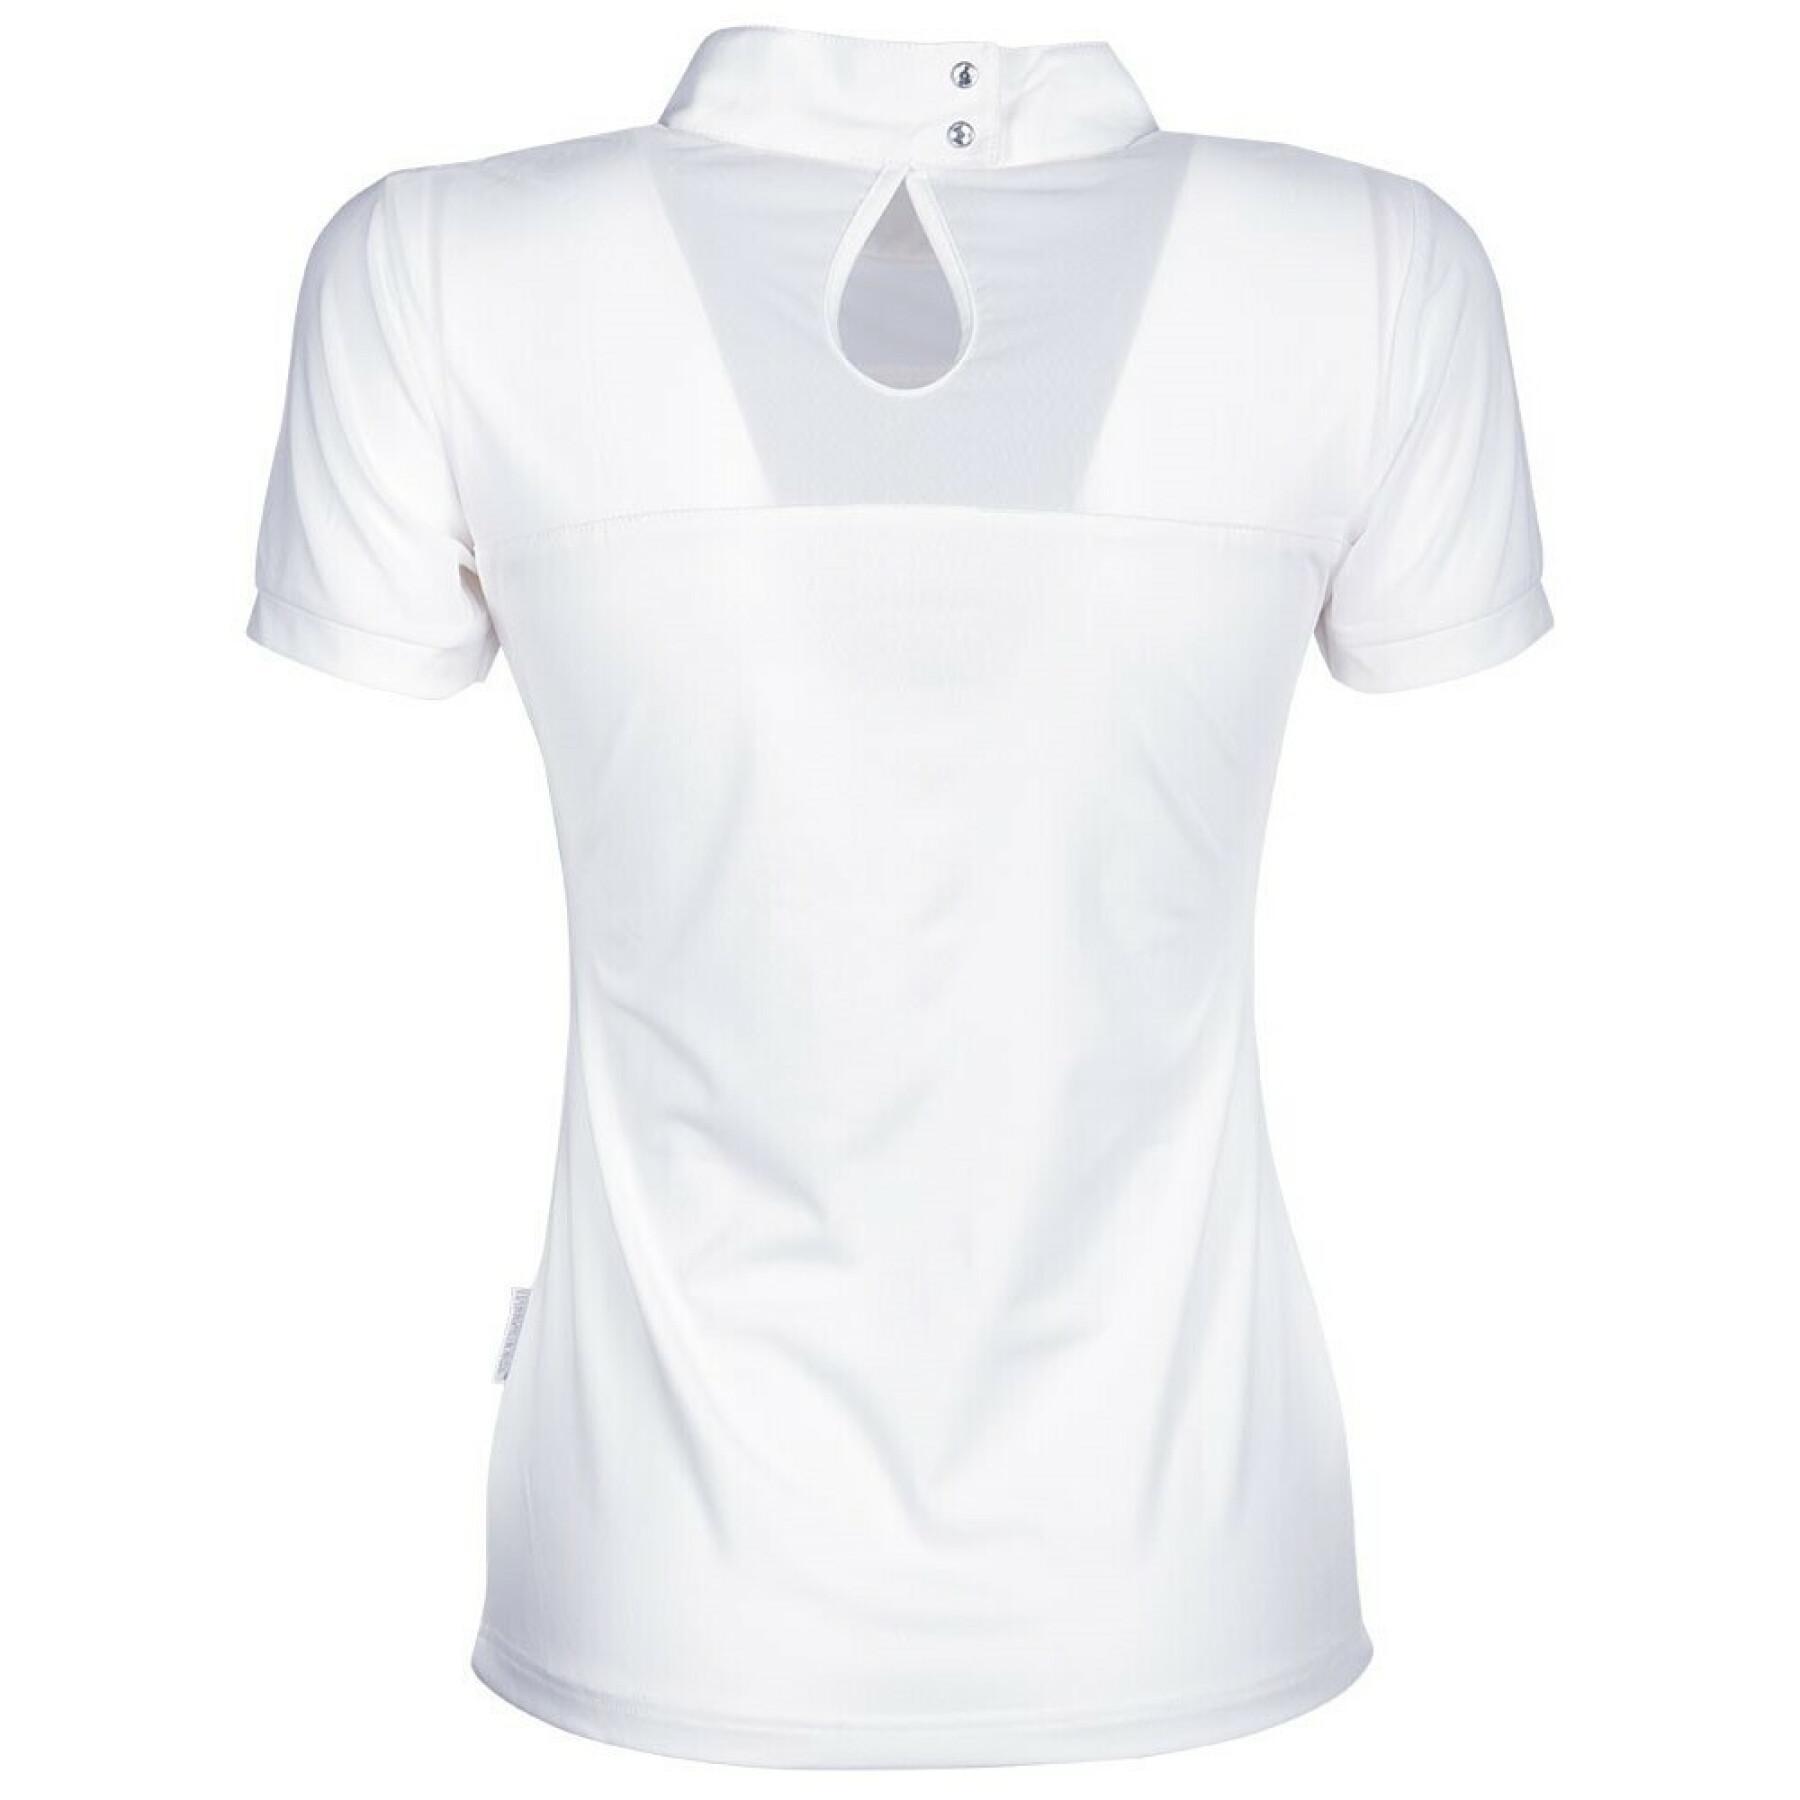 Mesh competition polo shirt top woman Harry's Horse Top